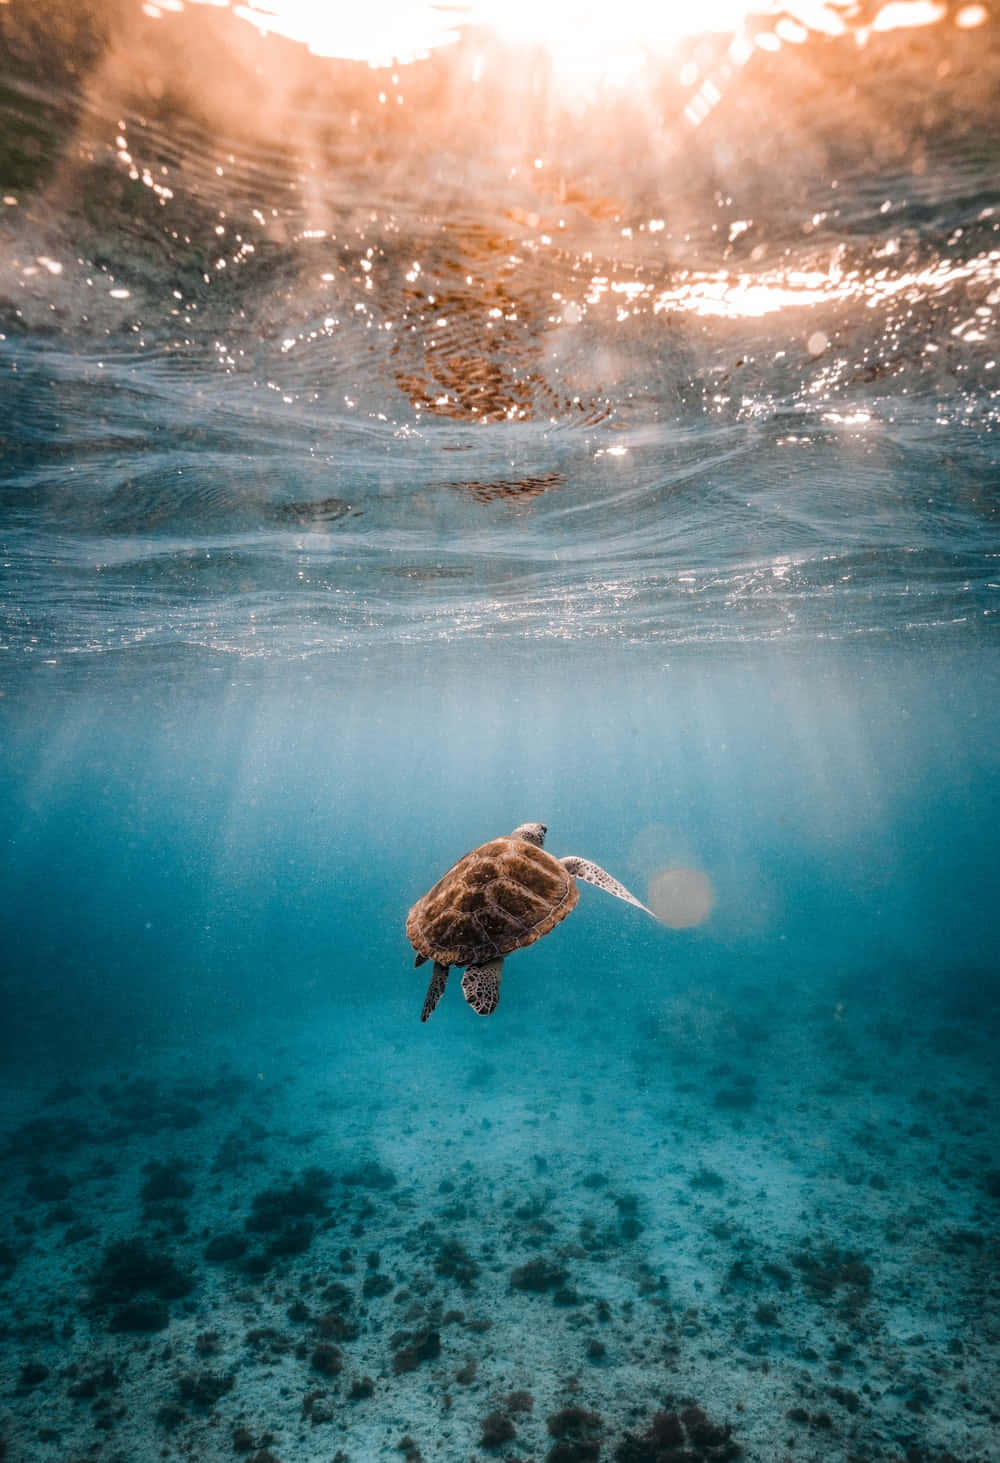 A majestic sea turtle gracefully swimming in crystal-clear ocean waters.